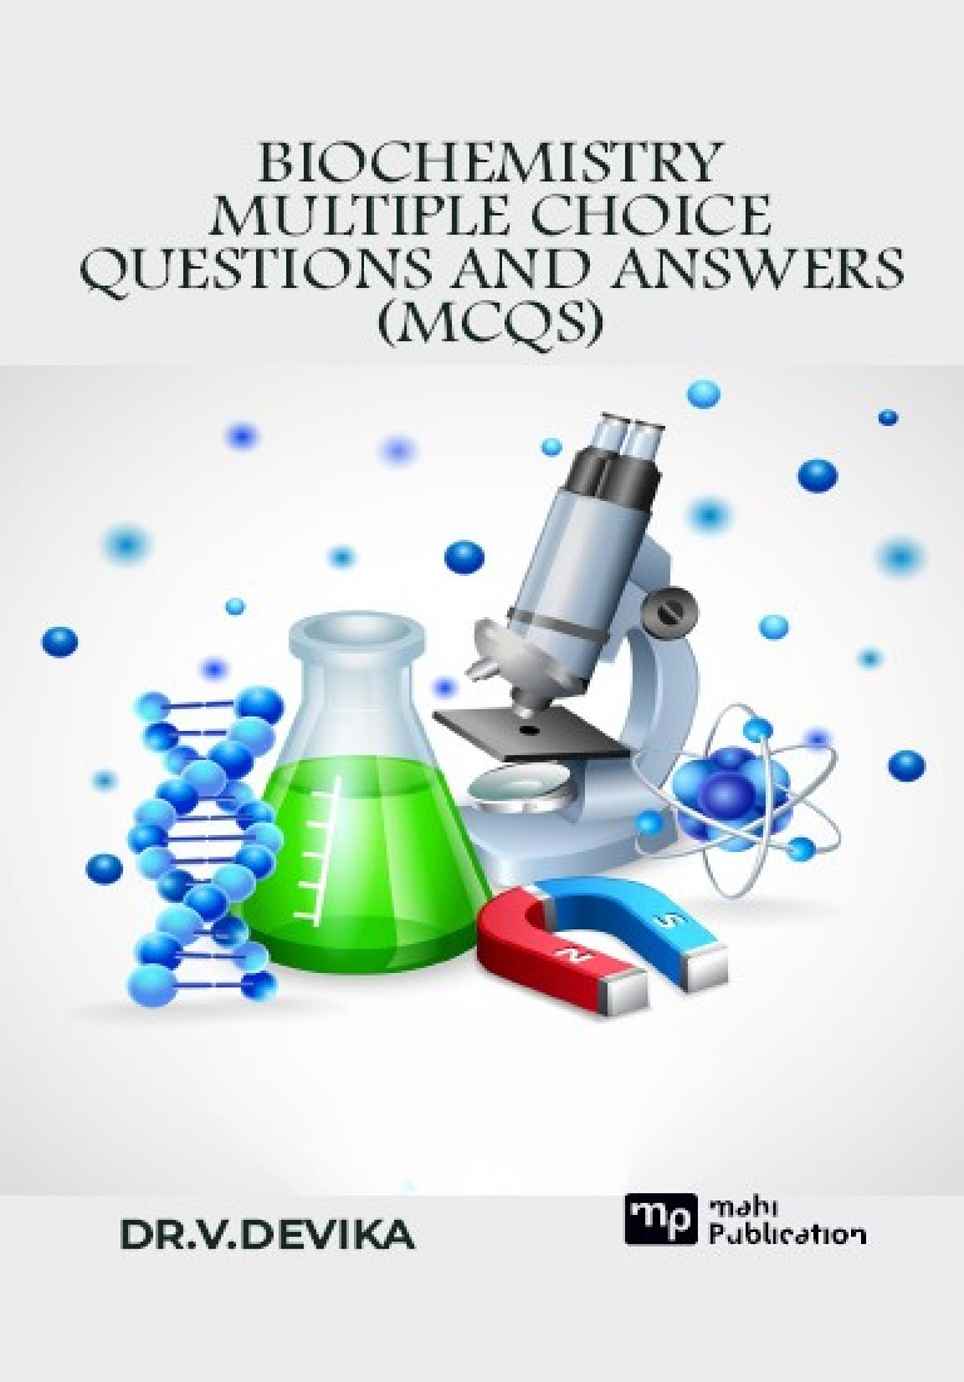 Biochemistry Multiple Choice Questions And Answers (MCQS)